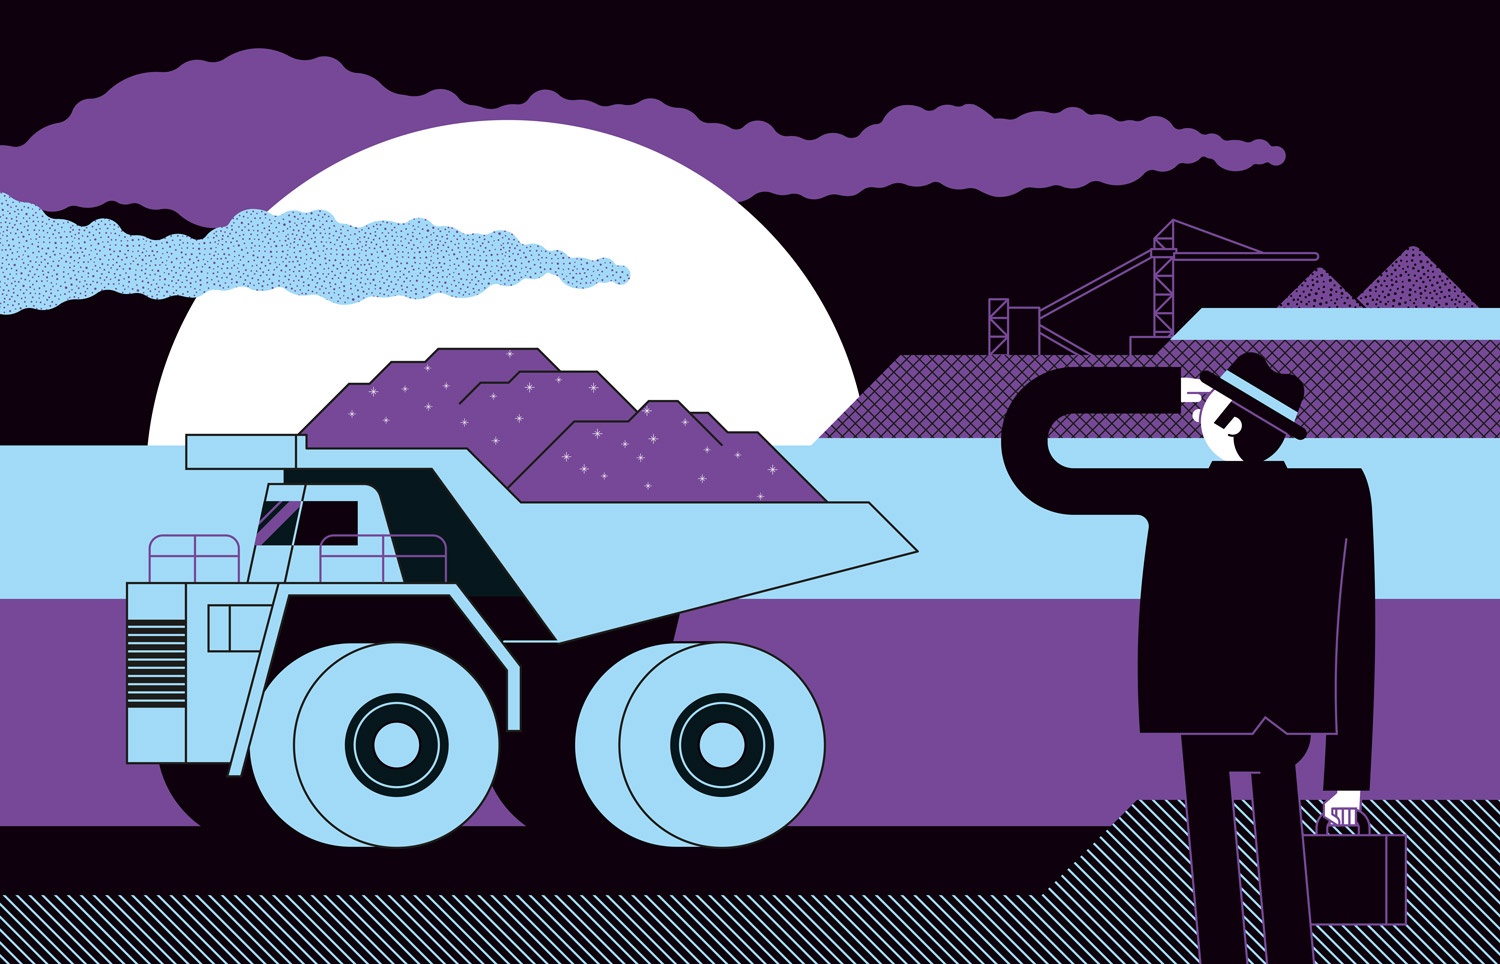 Illustration of business executive overlooking a surface coal mine in West Virginia with Mining truck.